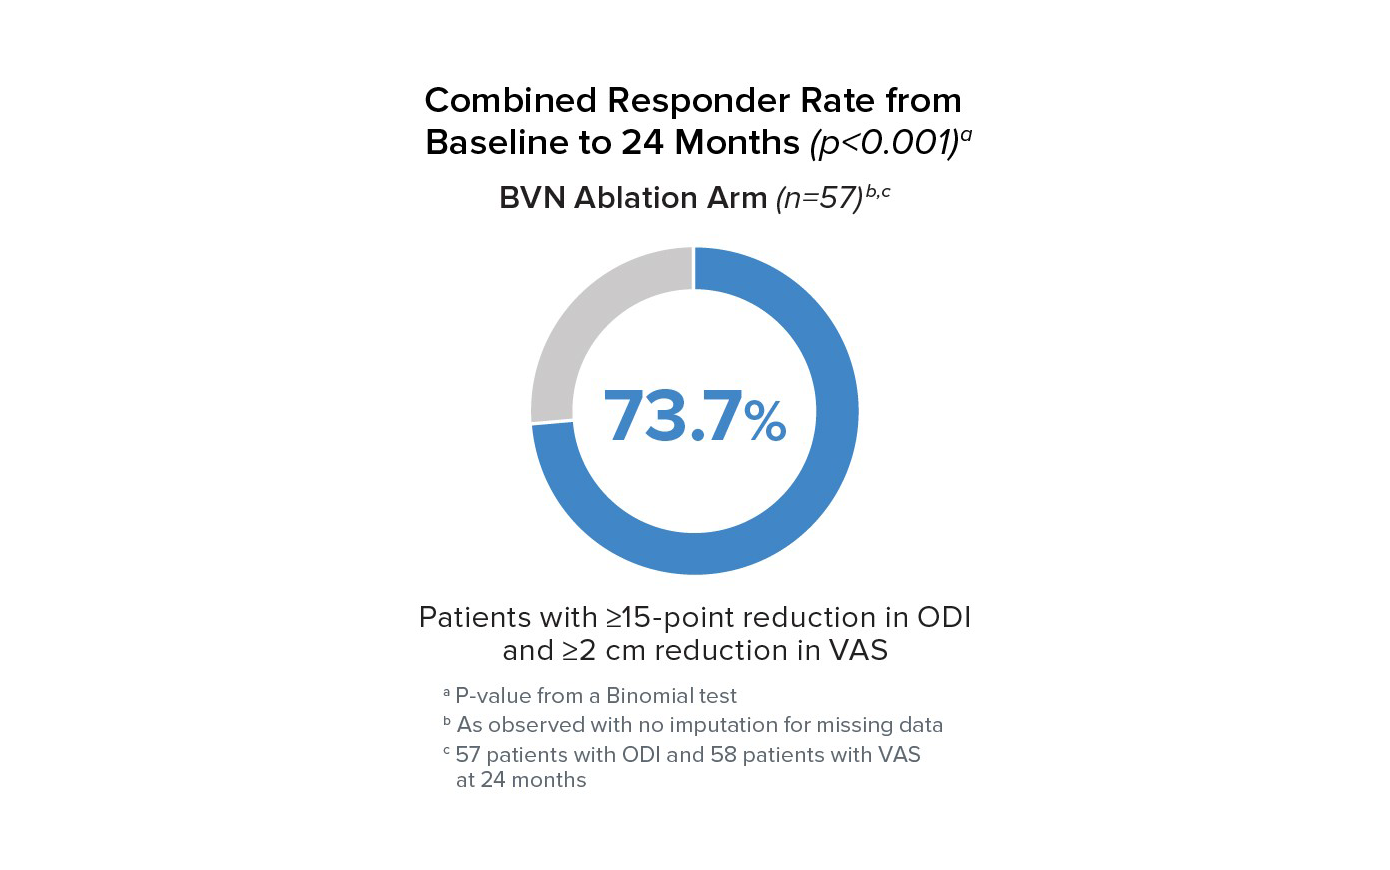 Combined responder rate from baseline to 24 months